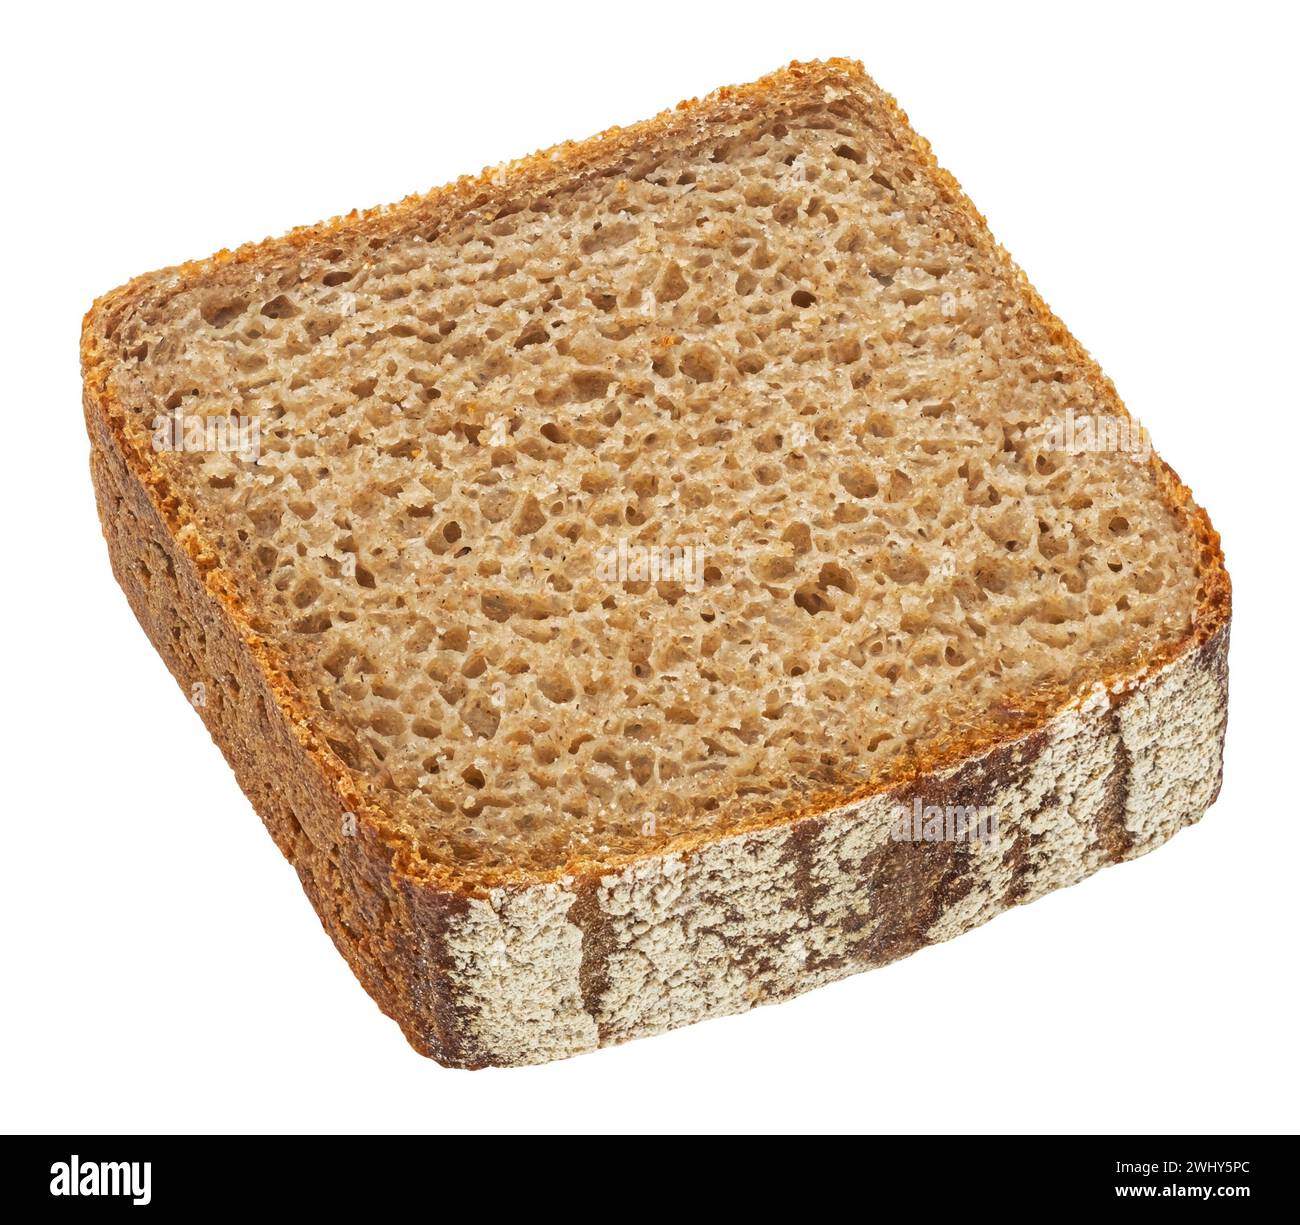 Rye bread slice isolated on white background, full depth of field Stock Photo